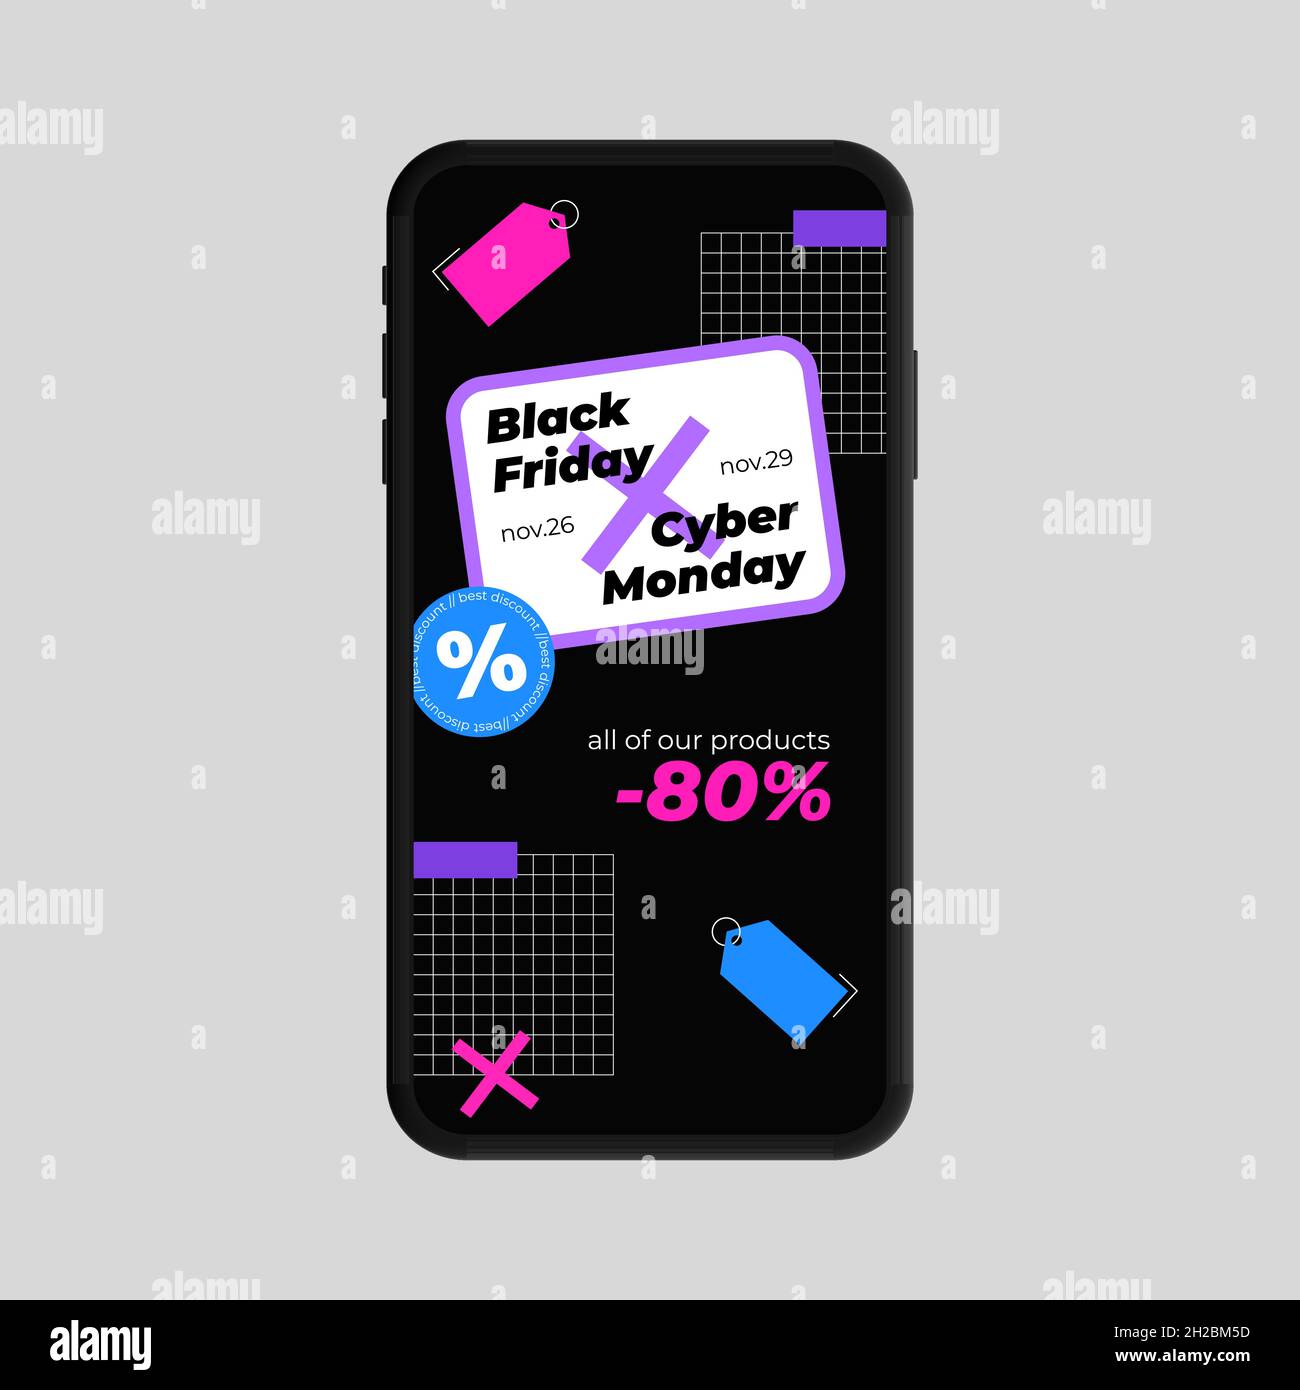 Black Friday Cyber Monday sale story. Vector illustration Stock Vector